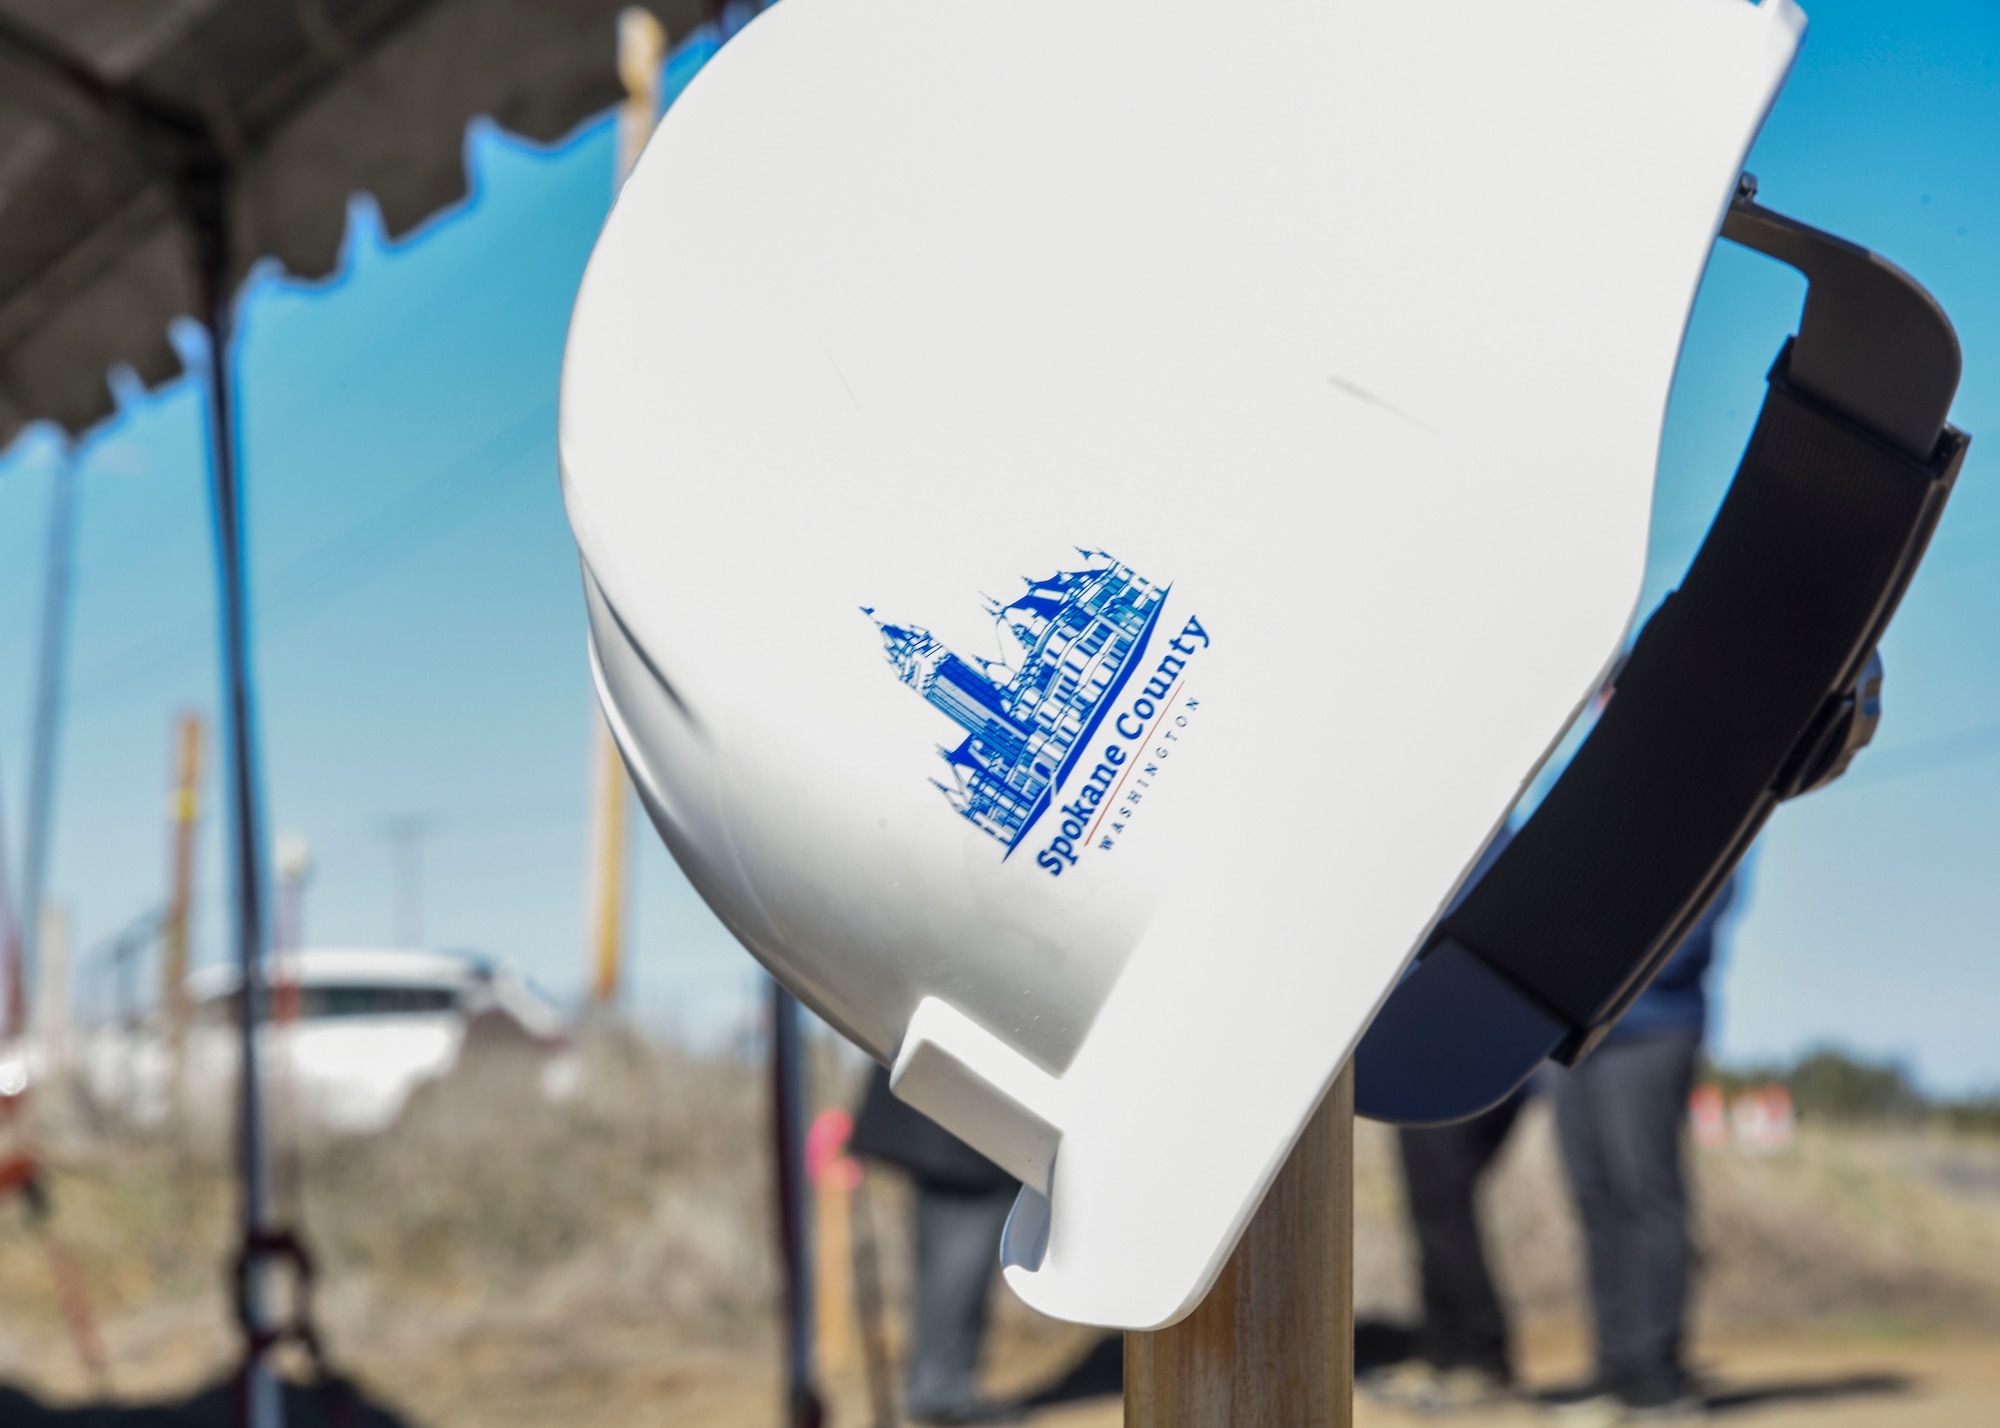 A Spokane County hard hat is displayed on a shovel at a groundbreaking ceremony.